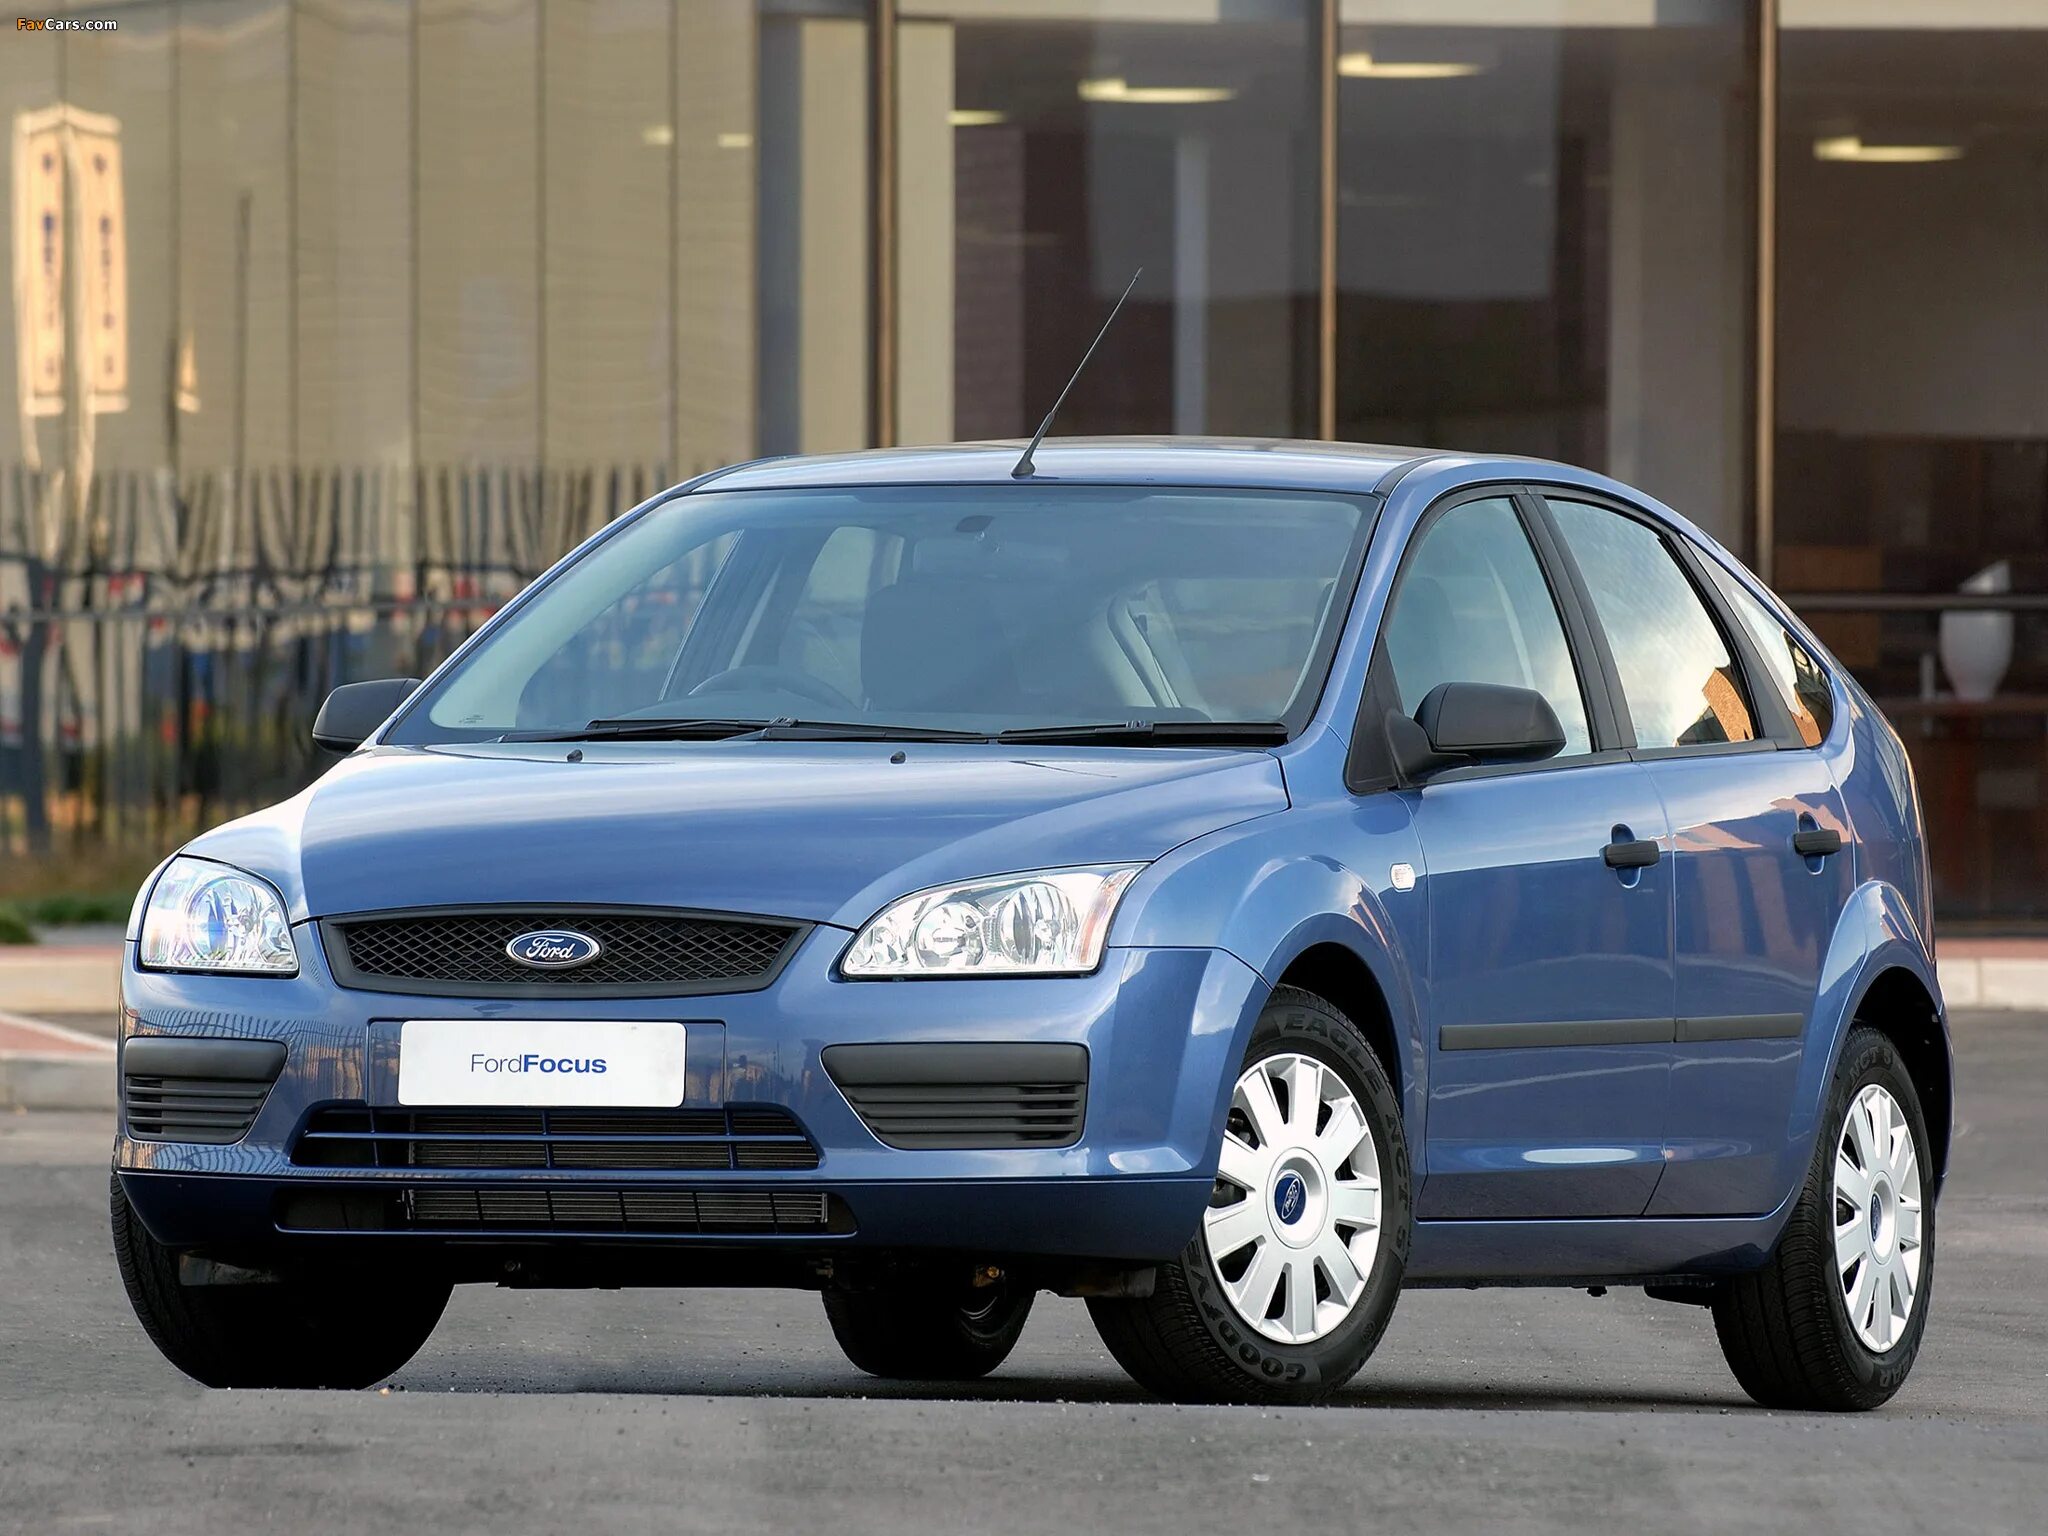 Форд 2005 г. Ford Focus 2005. Ford Focus 2 2005. Форд фокус 2 2005 года. Ford Focus 5.